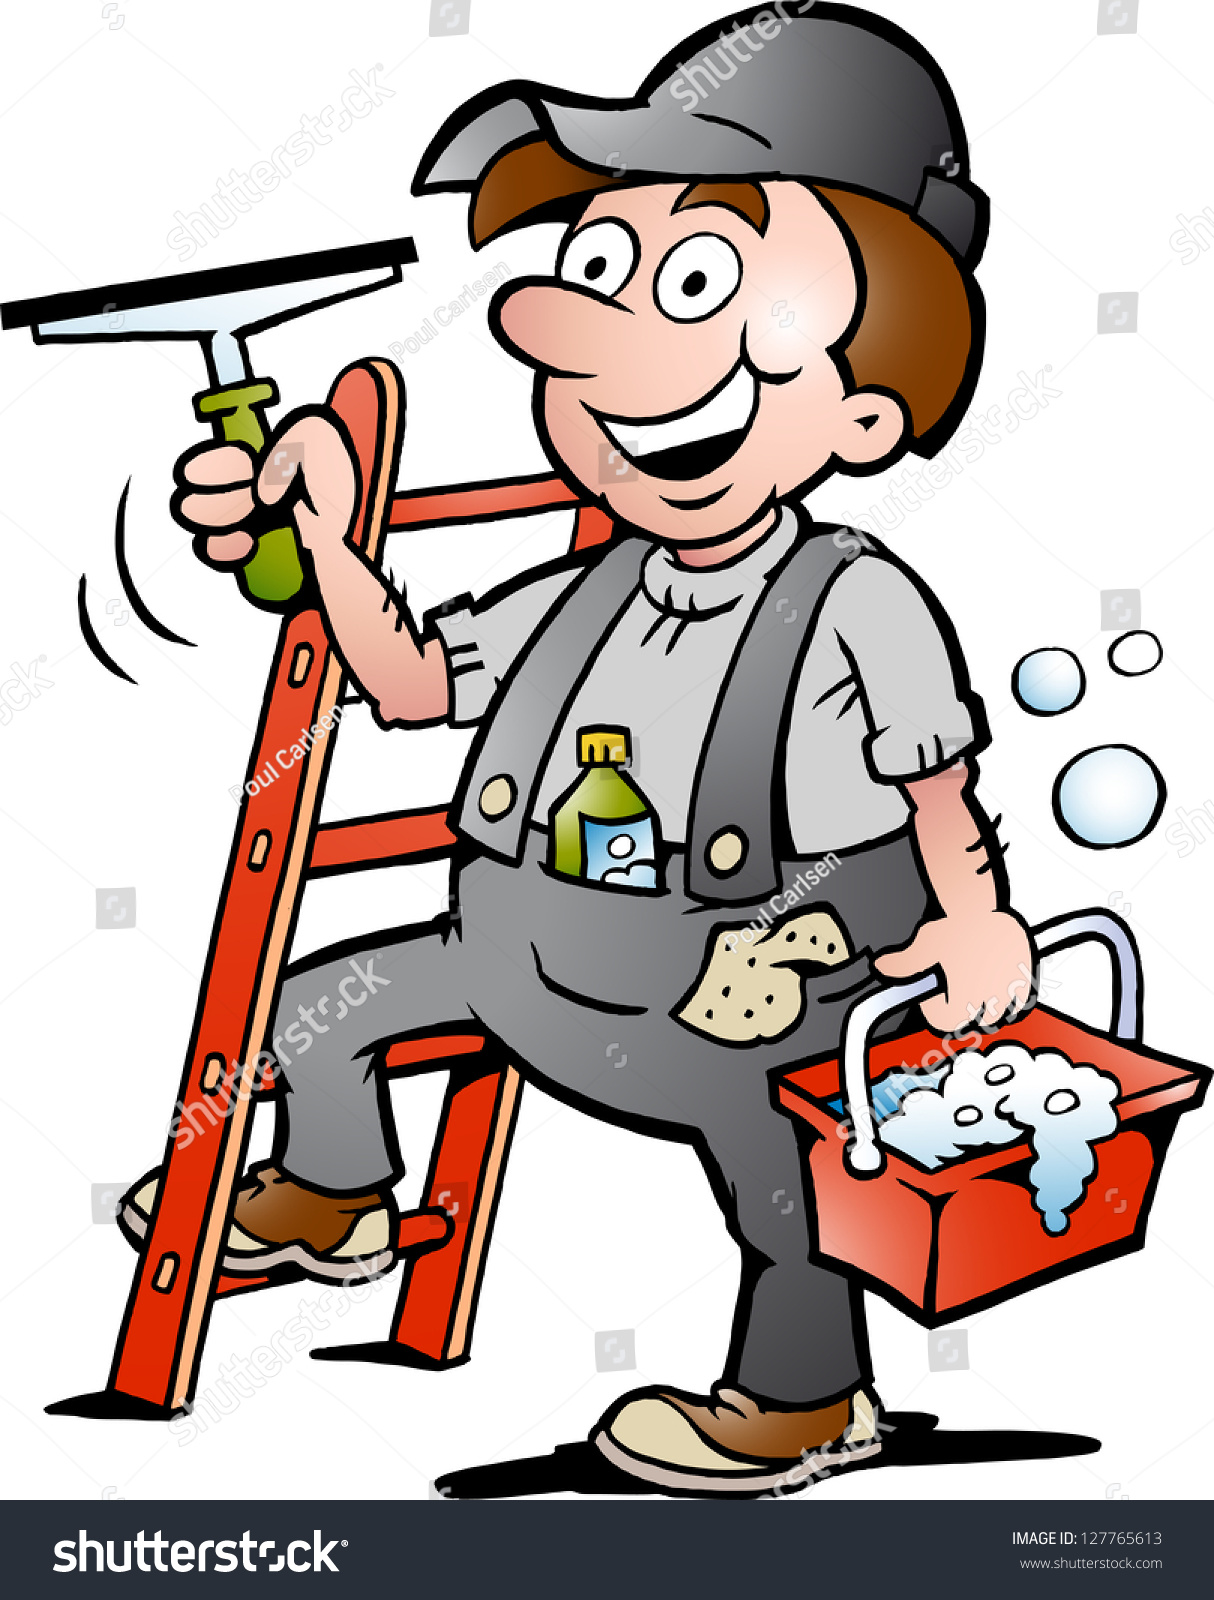 clipart window cleaner - photo #18